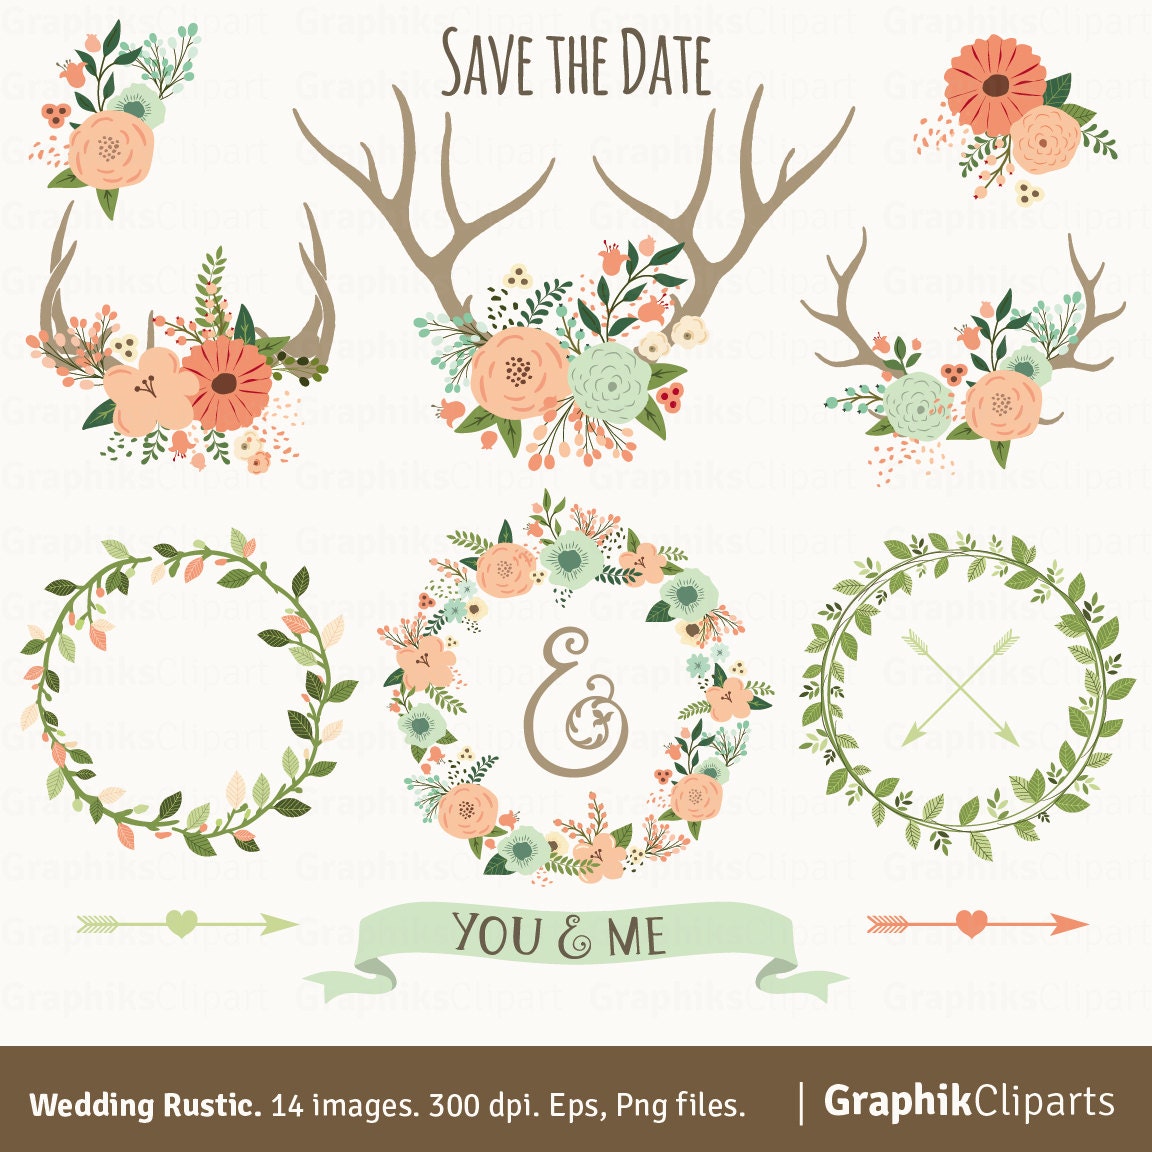 Download Rustic Wedding Clipart. WEDDING CLIPART. Floral